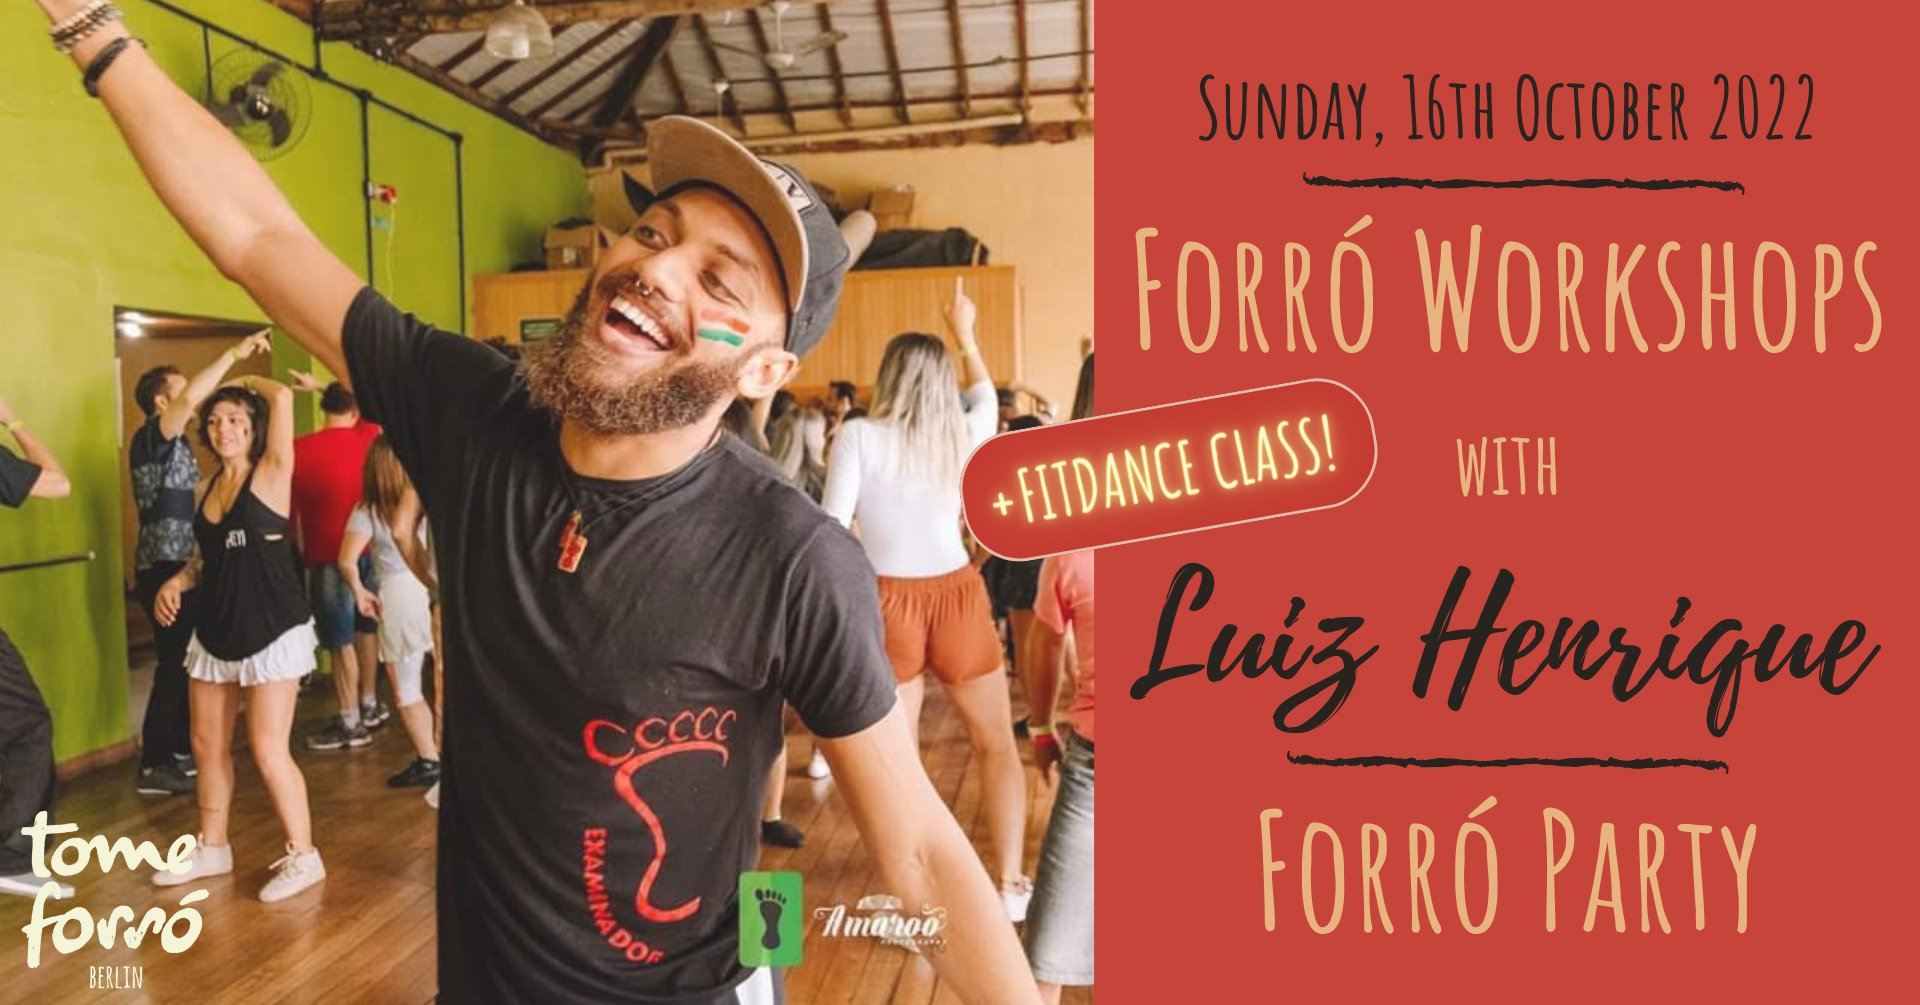 Forró Workshops (+Fitdance Class!) with Luiz Henrique do Carmo & Forró Party